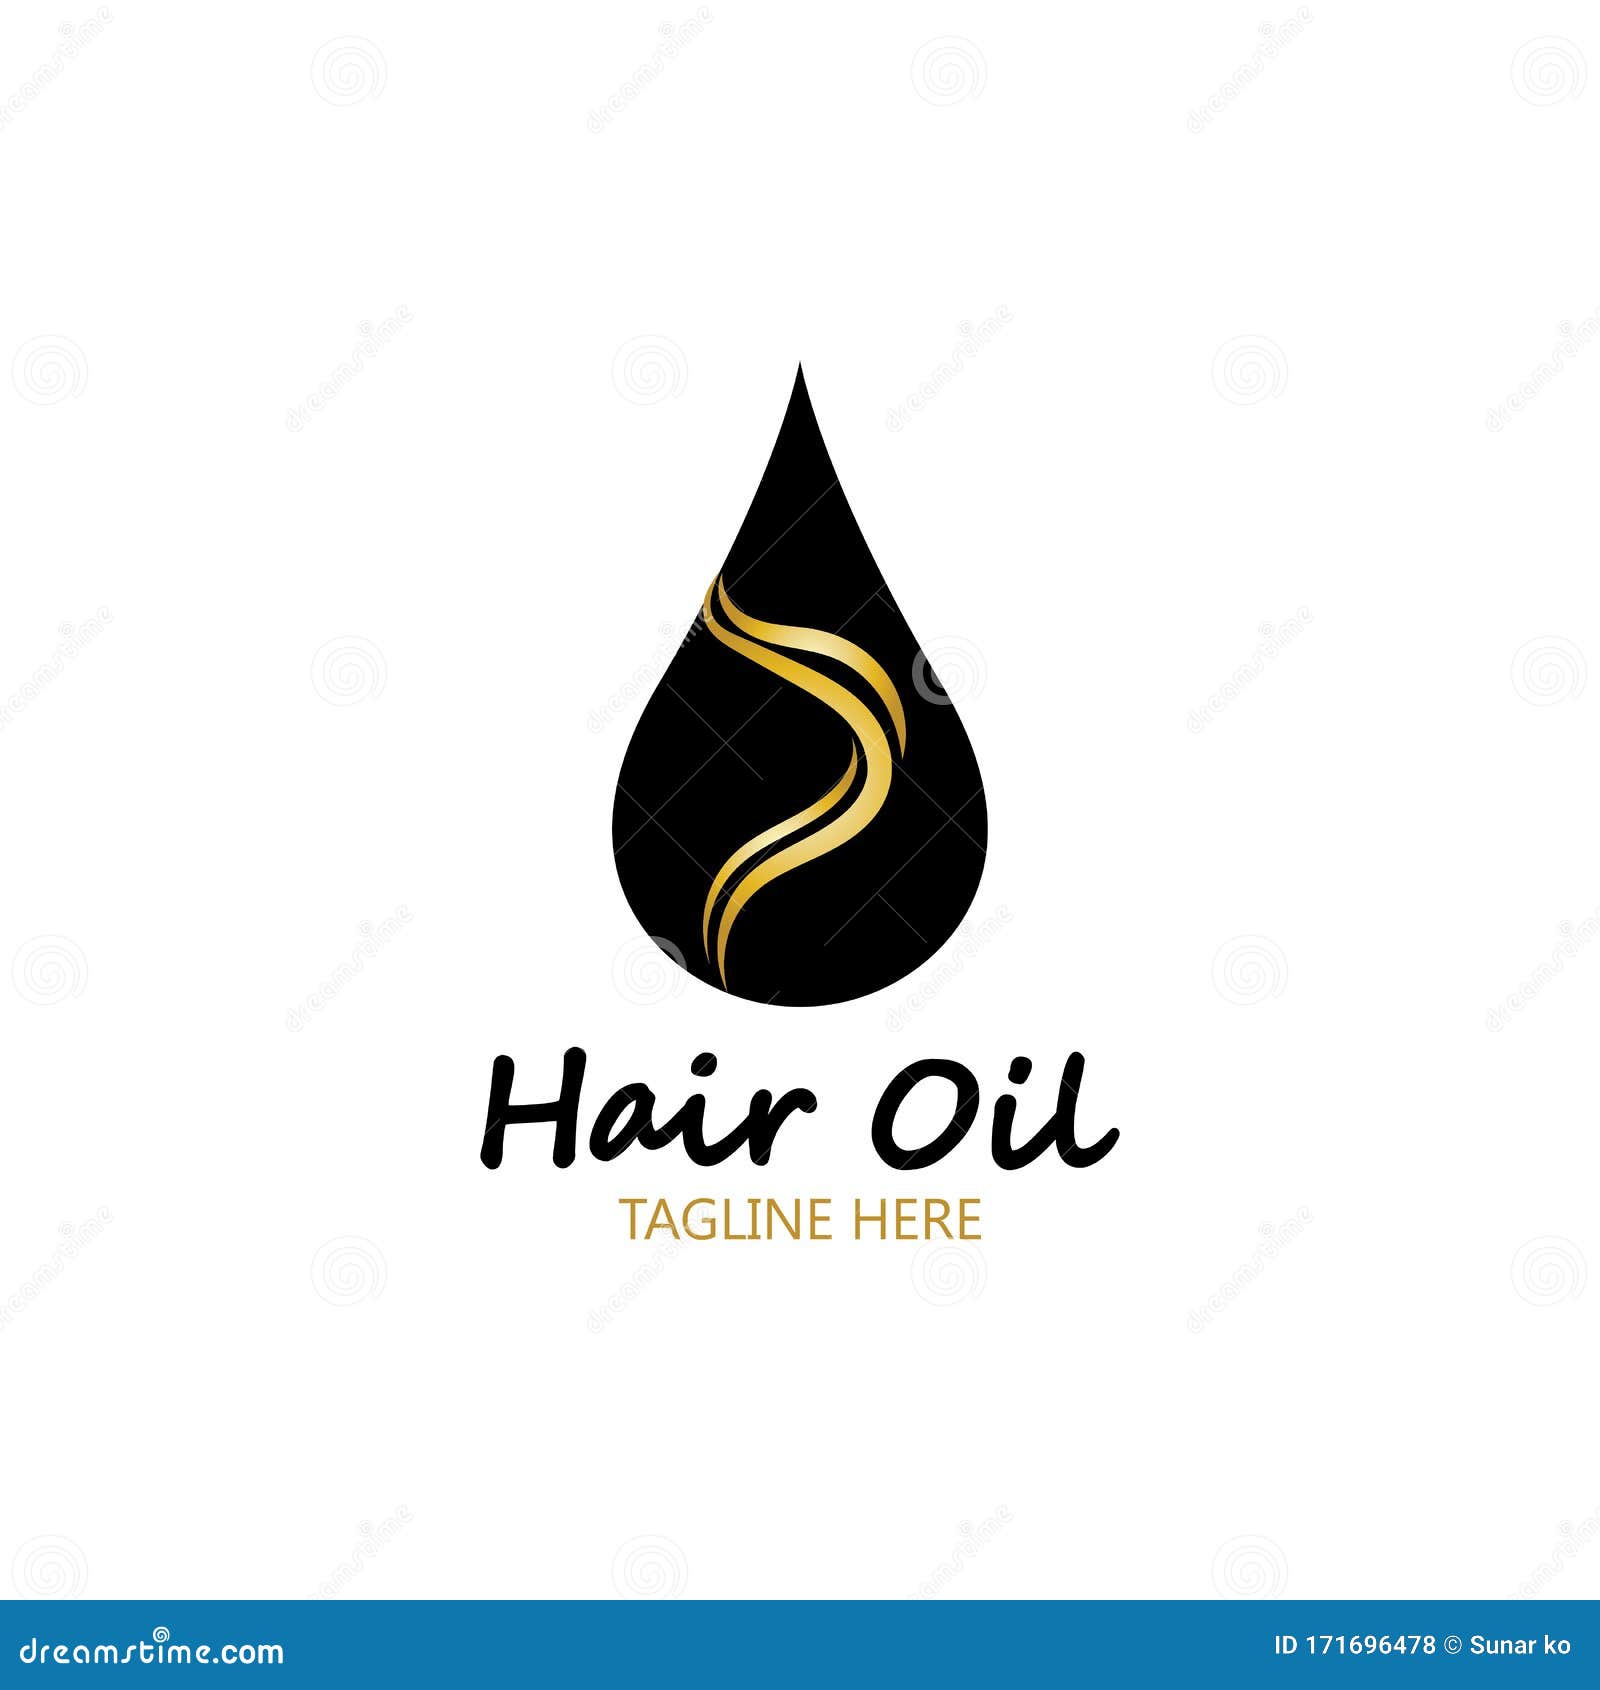 Hair Oil Essential with Drop Oil and Hair Logo Symbol-vector Stock Vector - Illustration of sign: 171696478